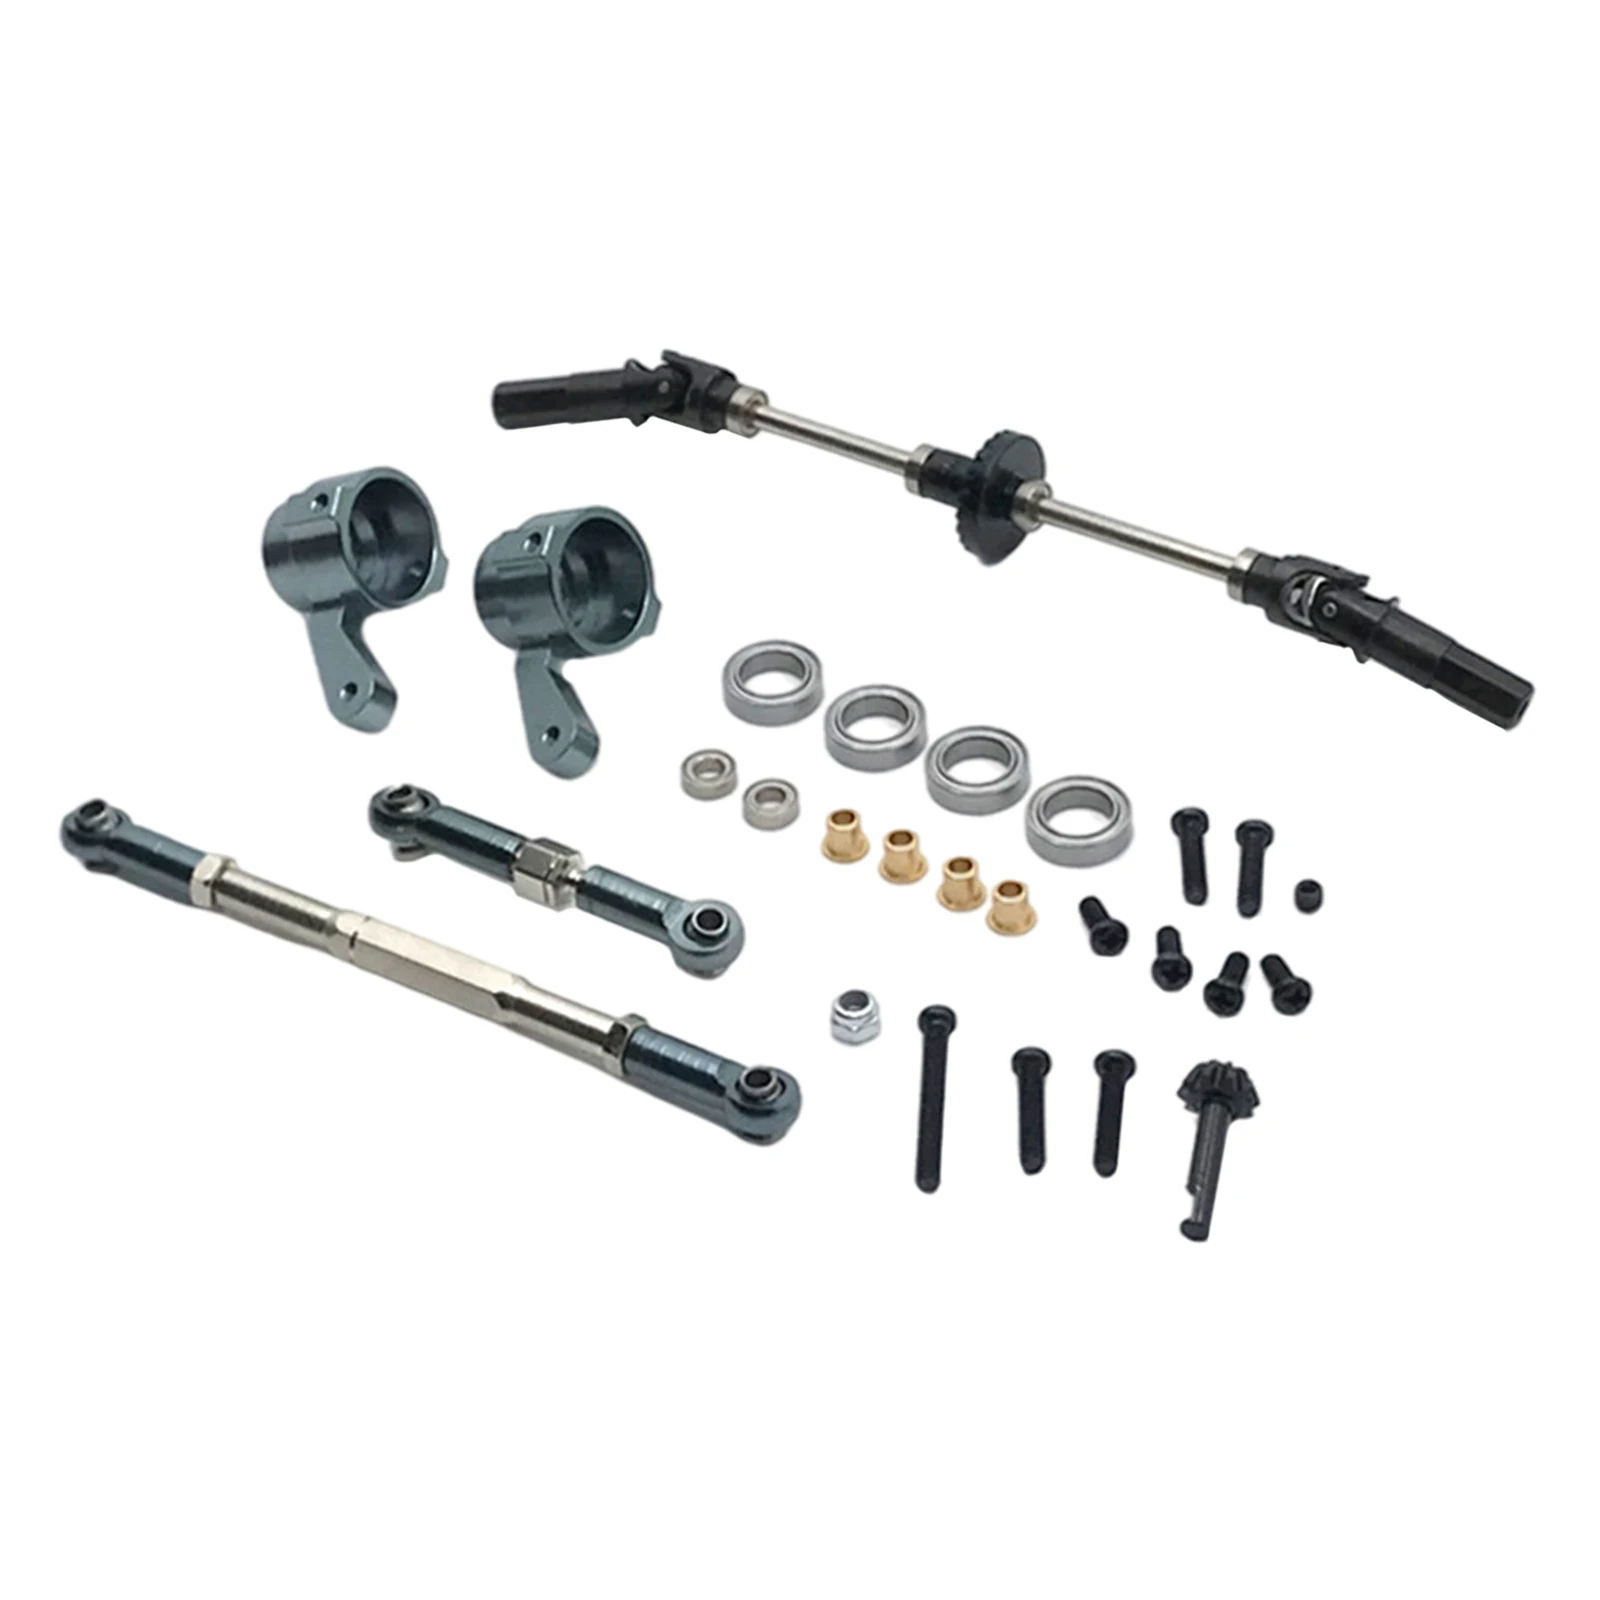 Metal RC Car Front Axle Kits for MN D90 D96 1/12 Truck Car Hobby Model Replacement Modification Accessories